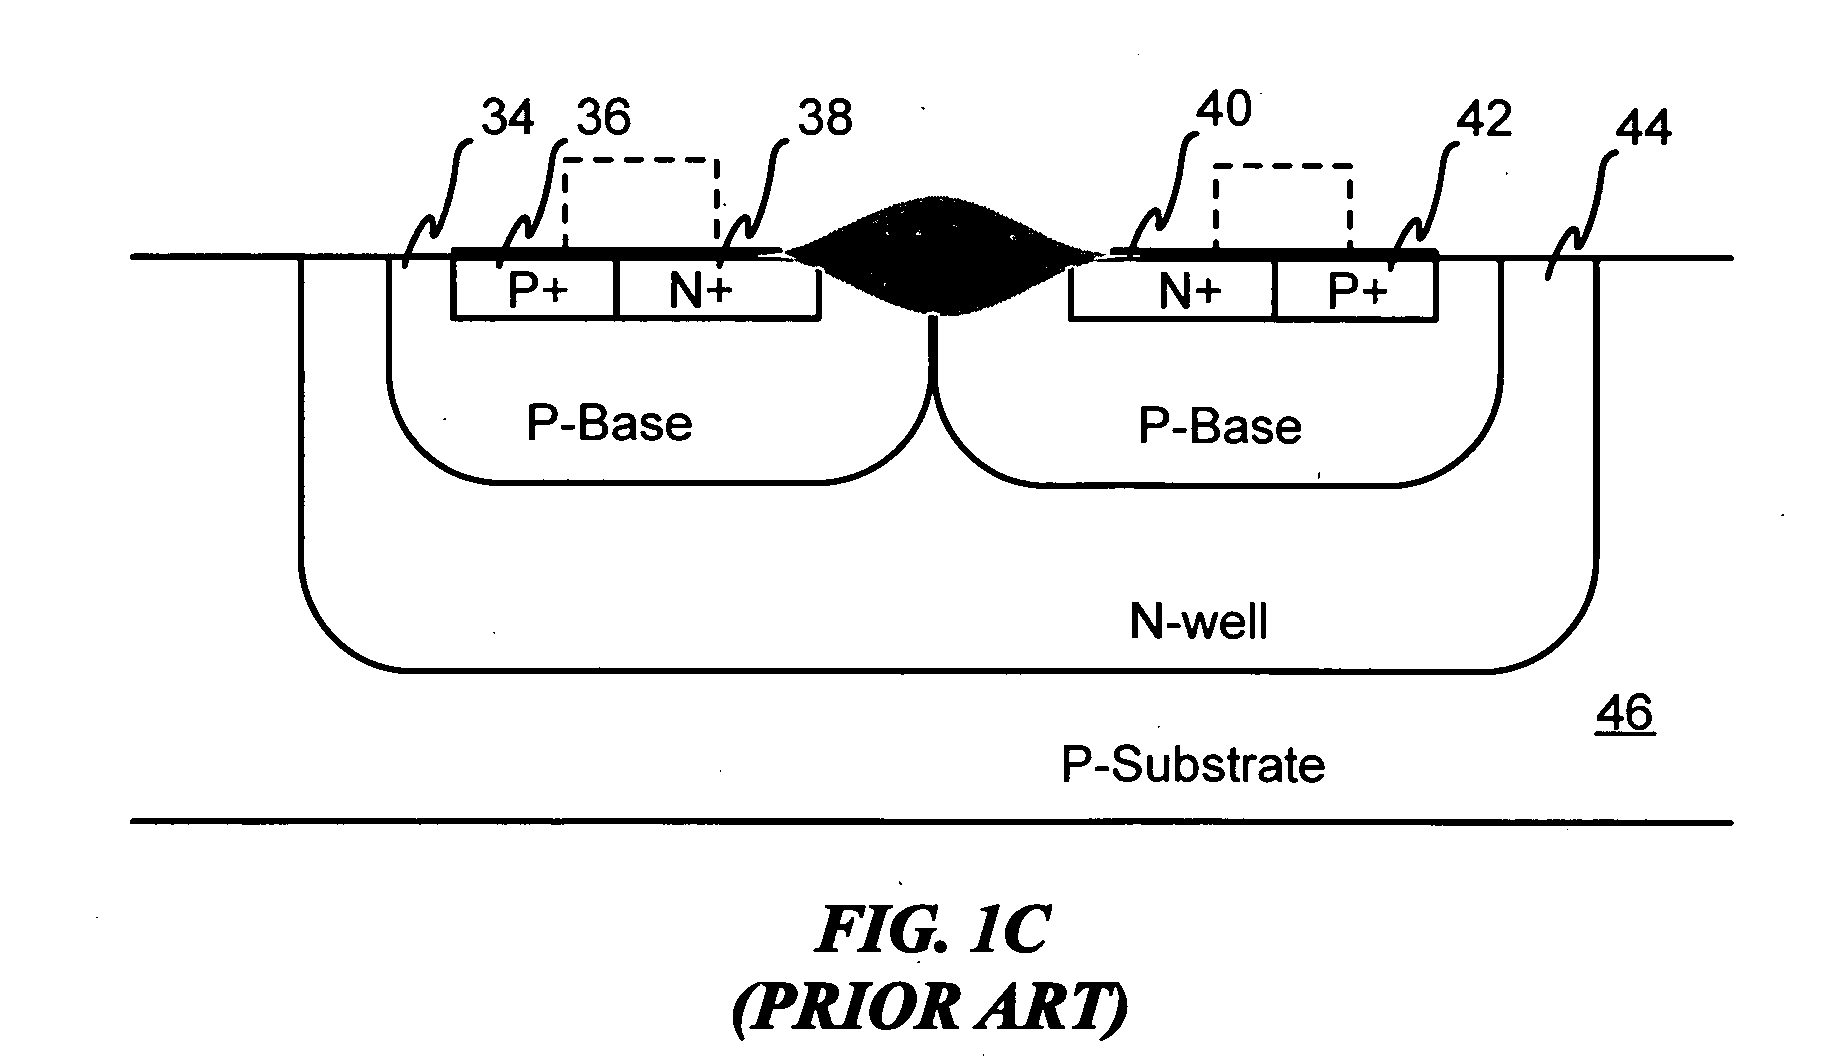 Devices with adjustable dual-polarity trigger- and holding-voltage/current for high level of electrostatic discharge protection in sub-micron mixed signal CMOS/BiCMOS integrated circuits